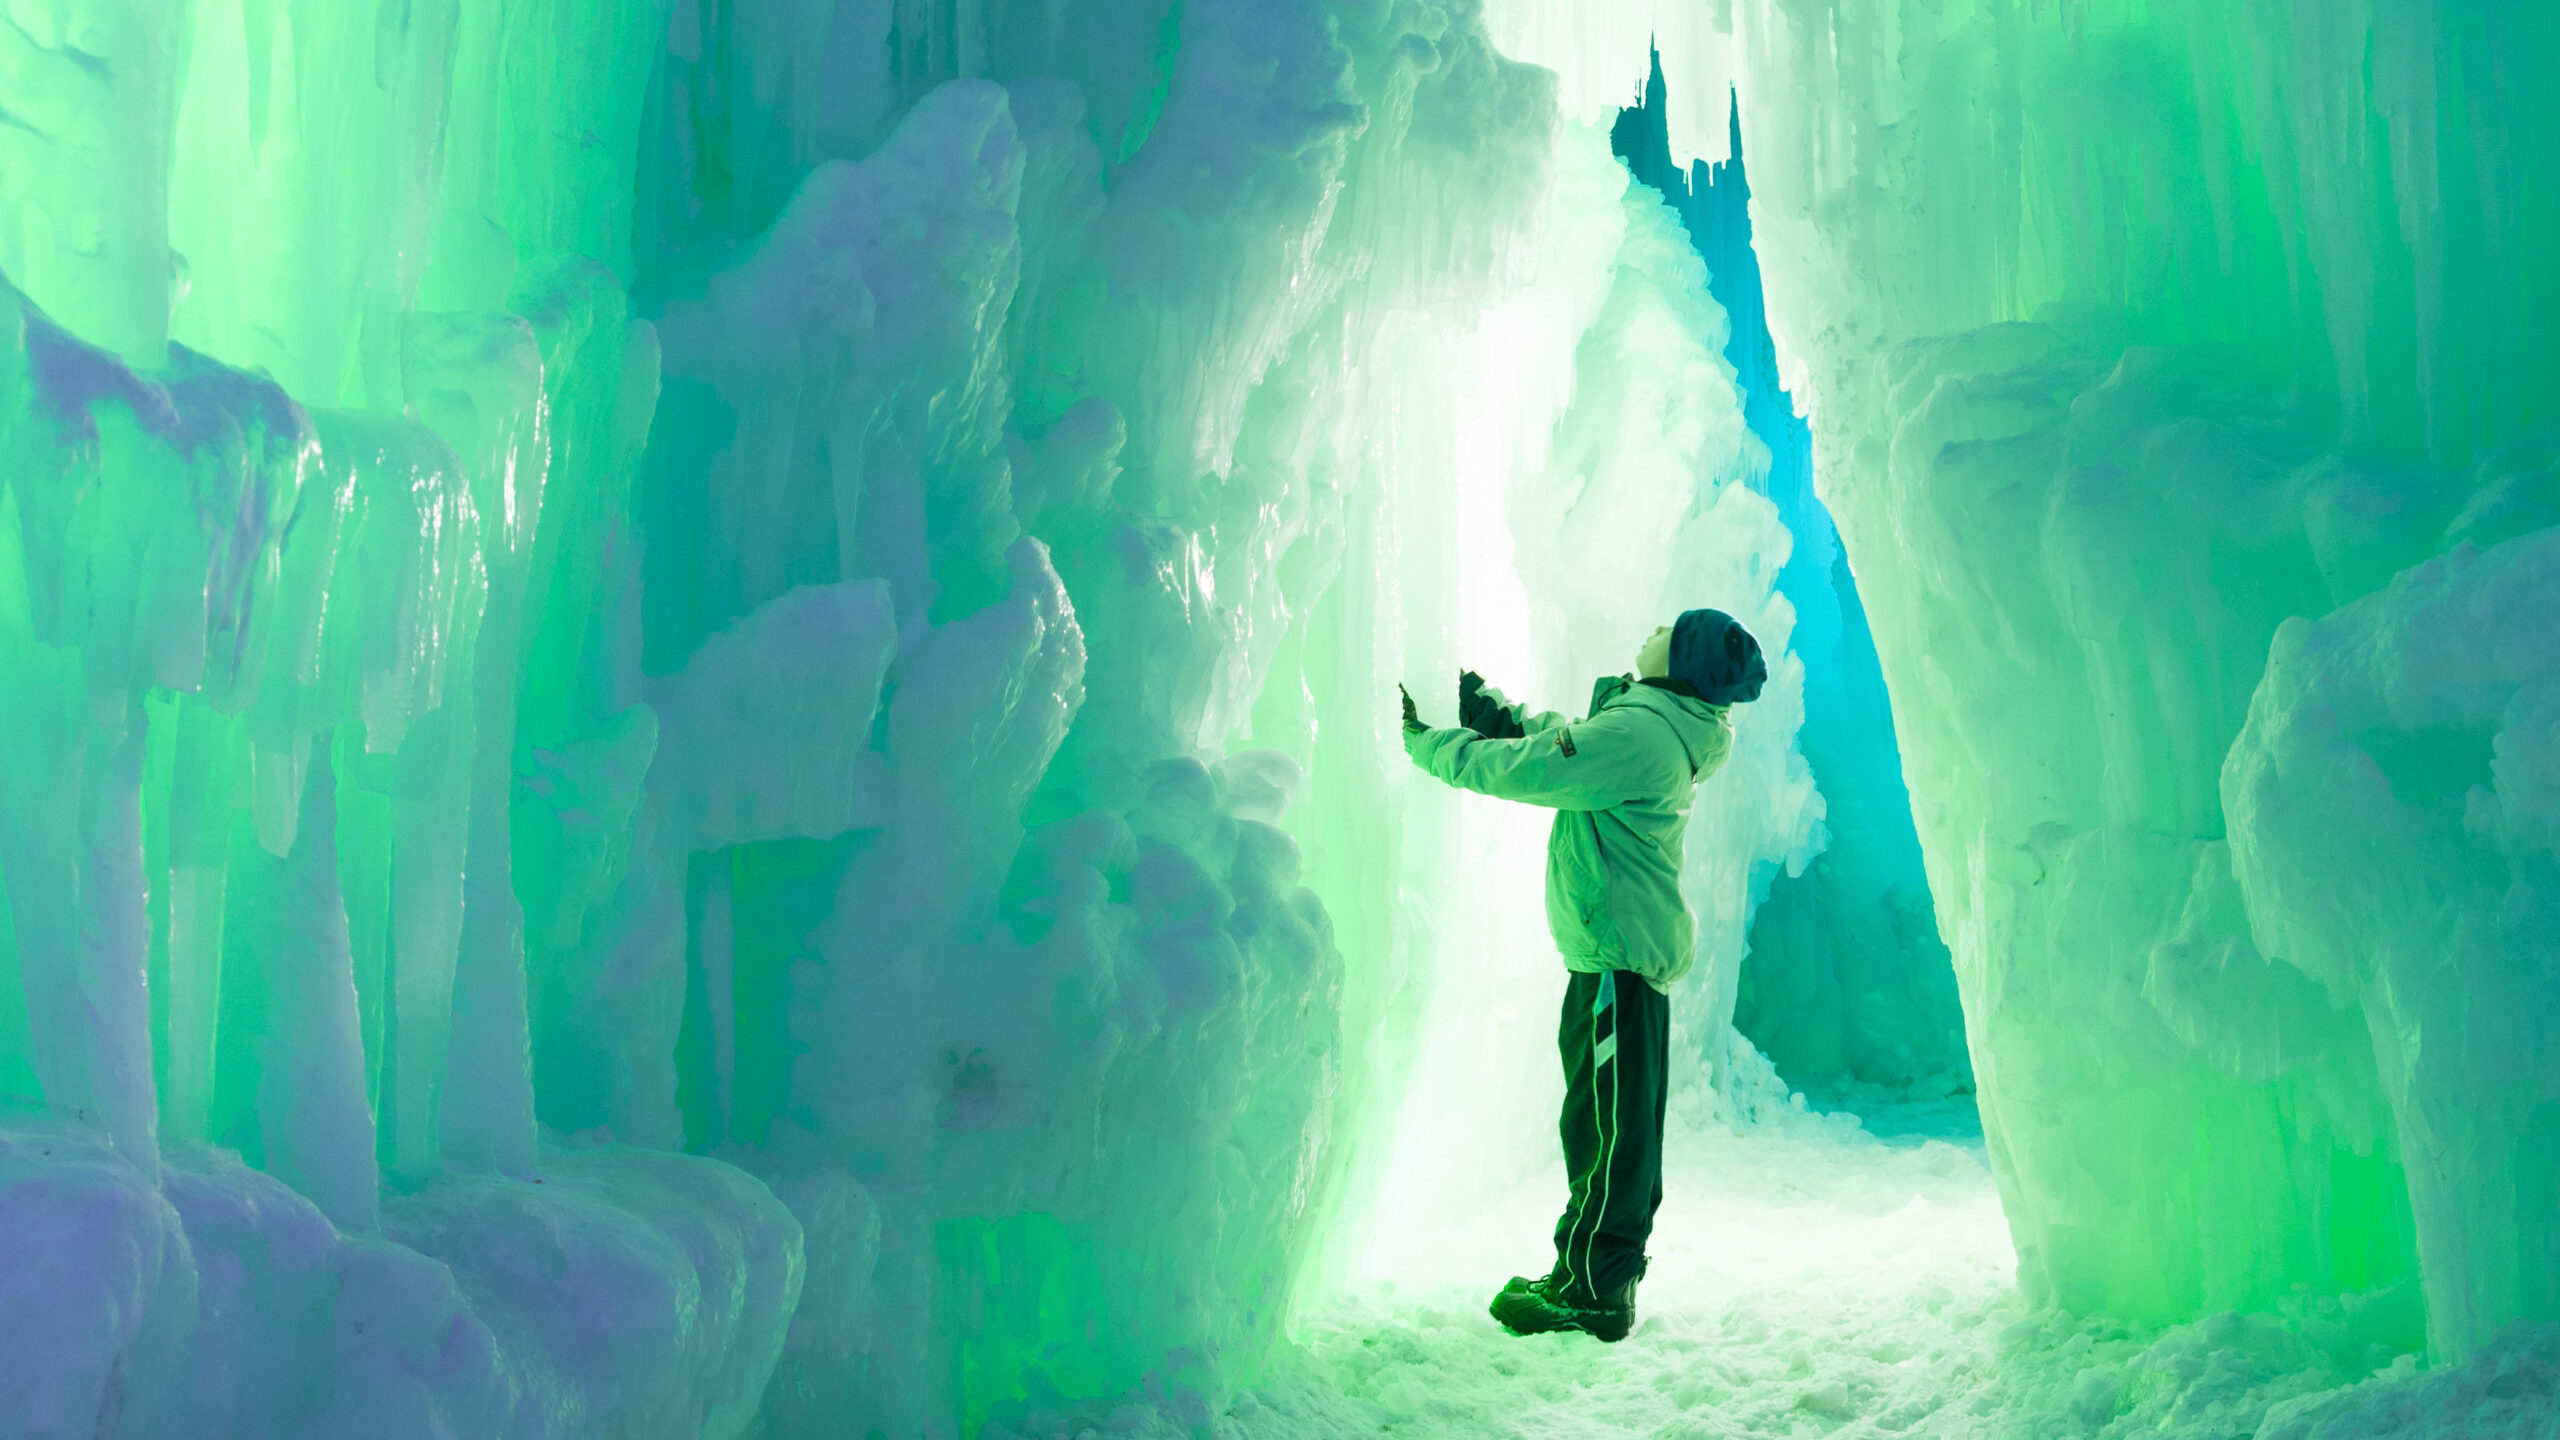 The Midway Ice Castles are opening early this year for the first time in history, before Christmas ...